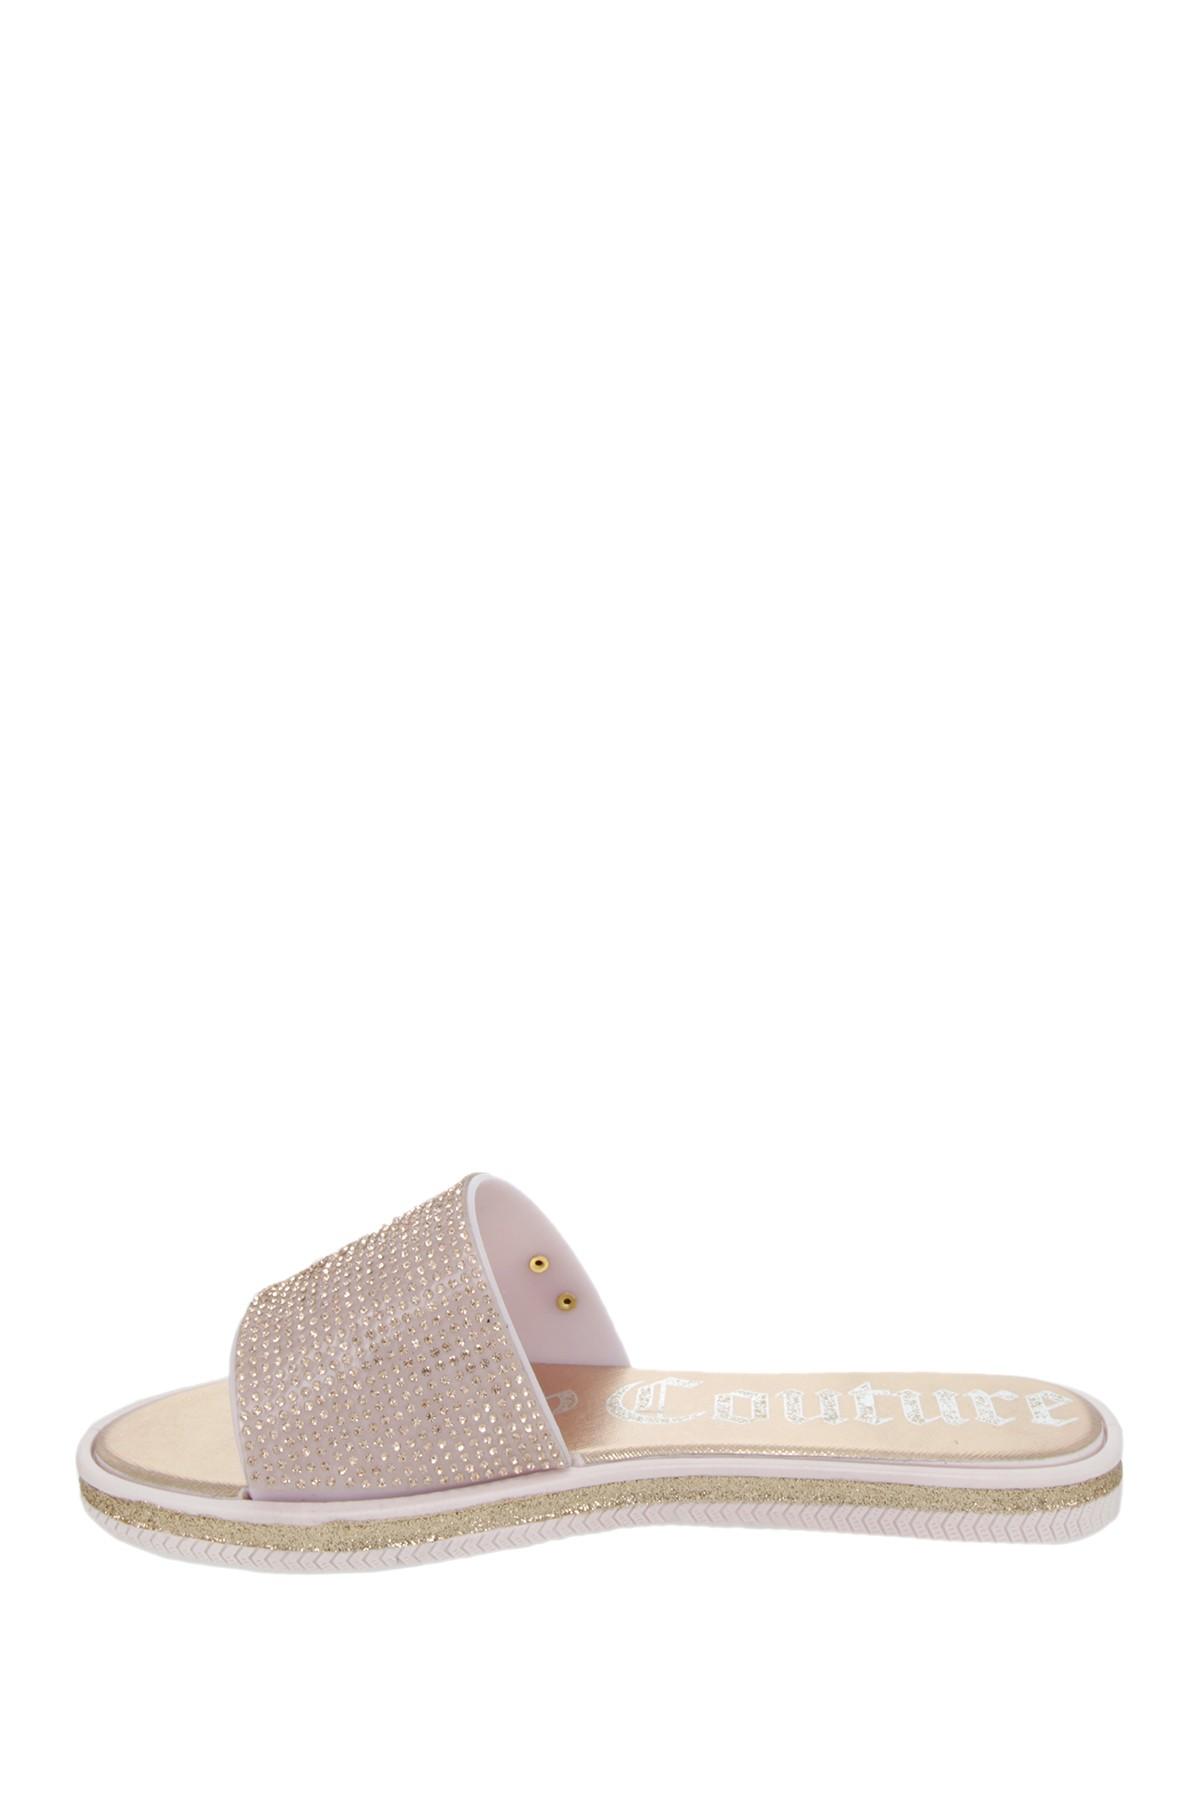 Juicy Couture Yippy Slide Sandal in Pink - Lyst